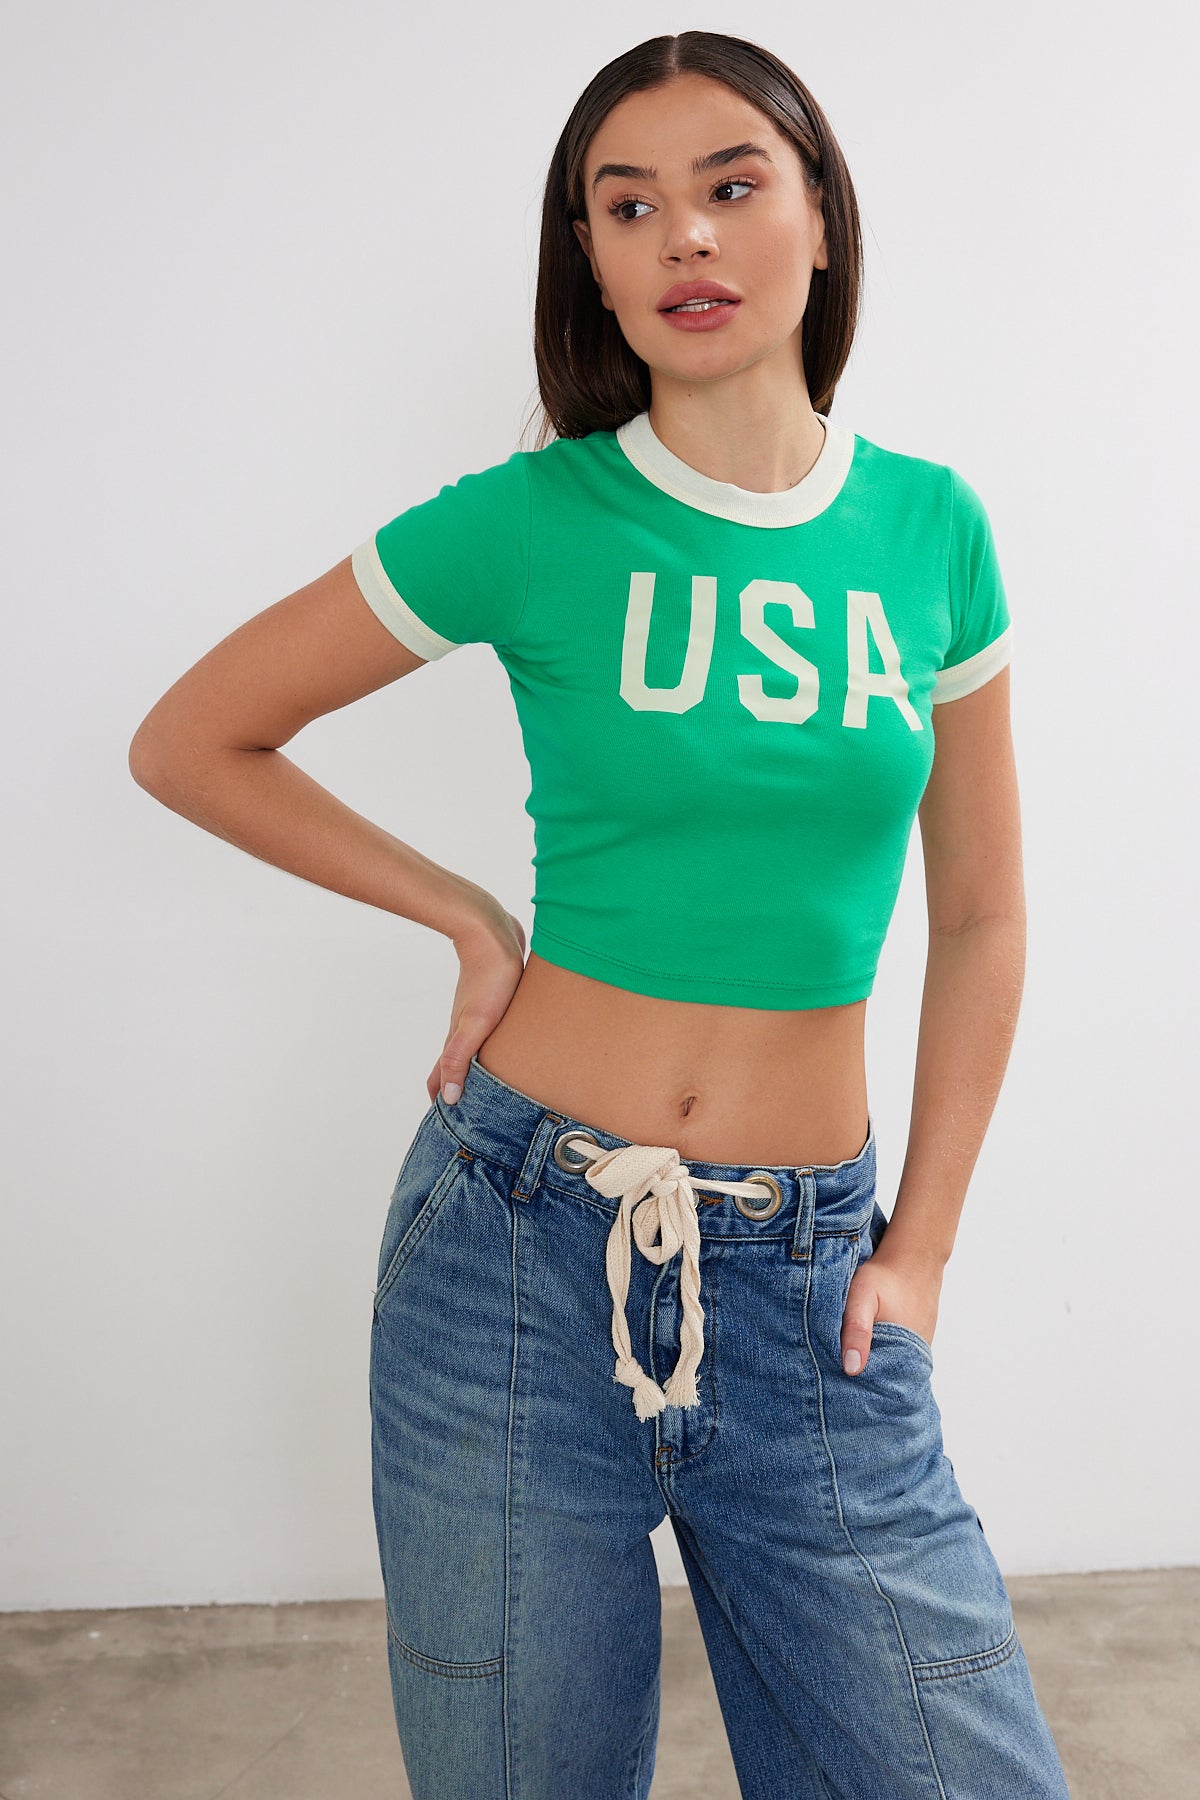 Womens USA Printed Crop Top Cropped USA T-Shirt (S-M-L / 2-2-2) 6 Pieces